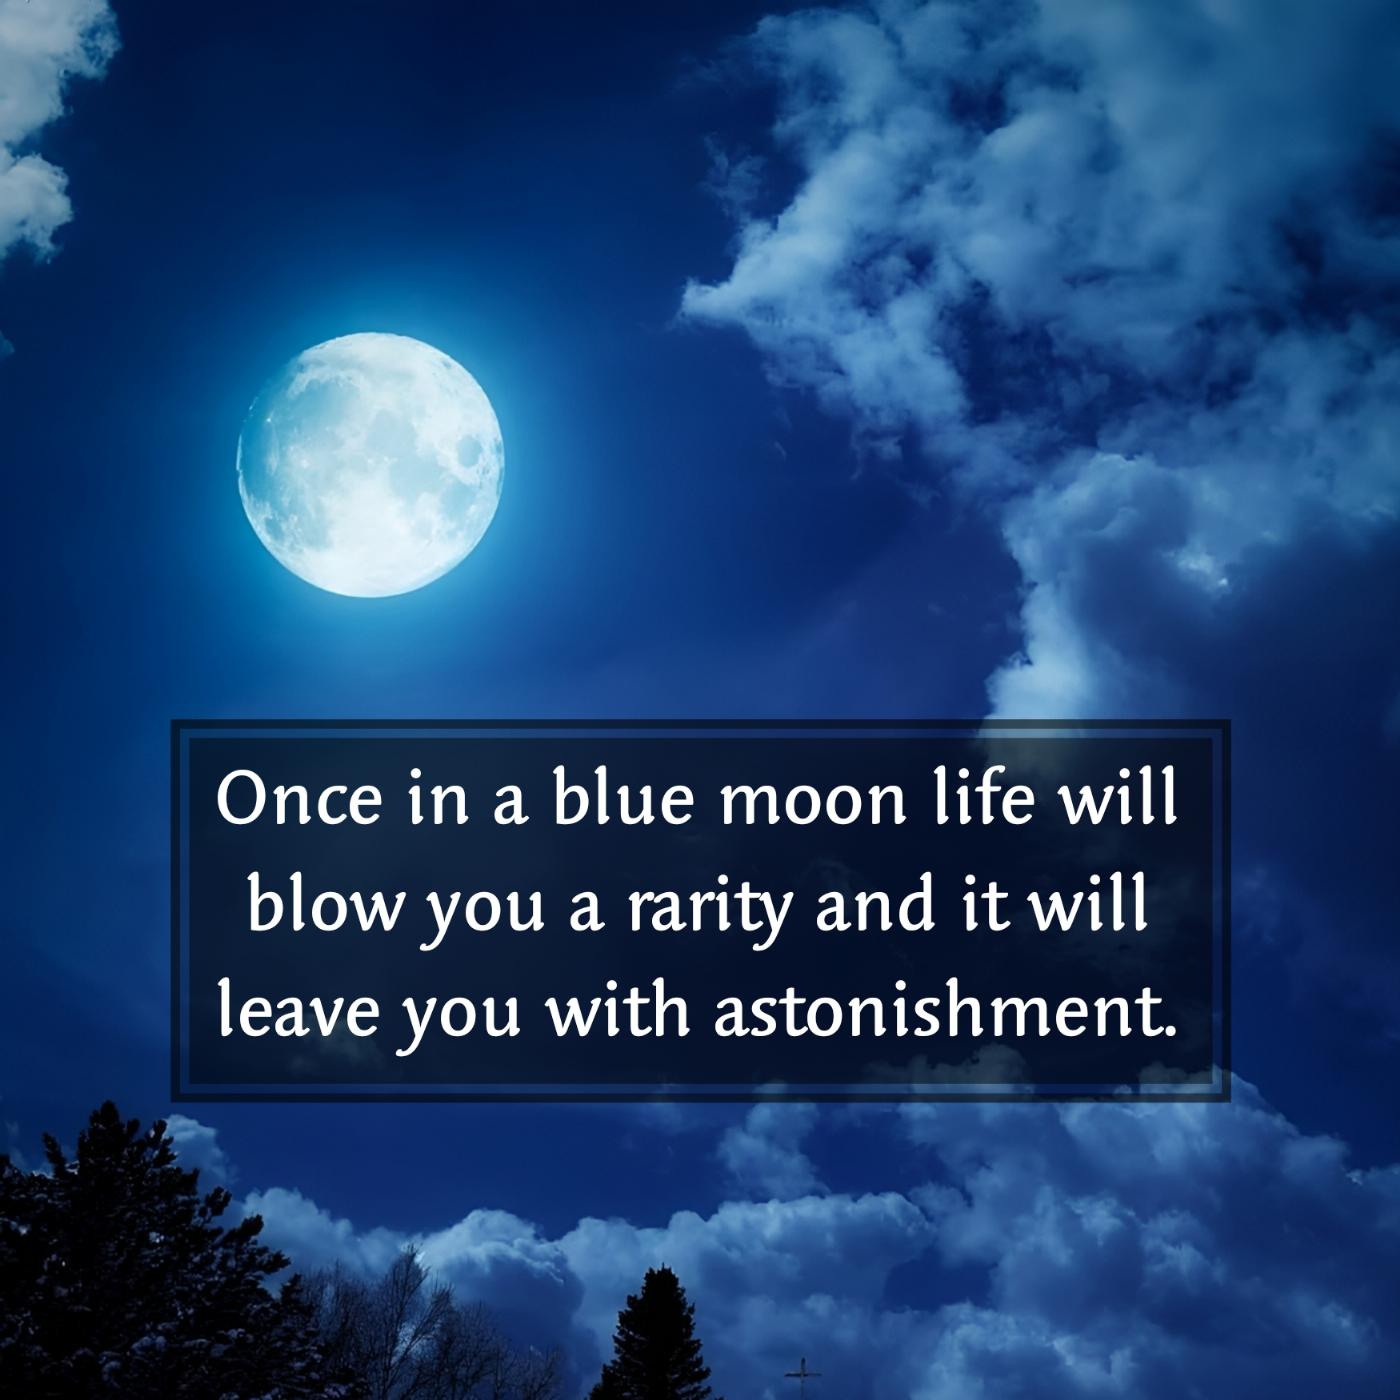 Once in a blue moon life will blow you a rarity